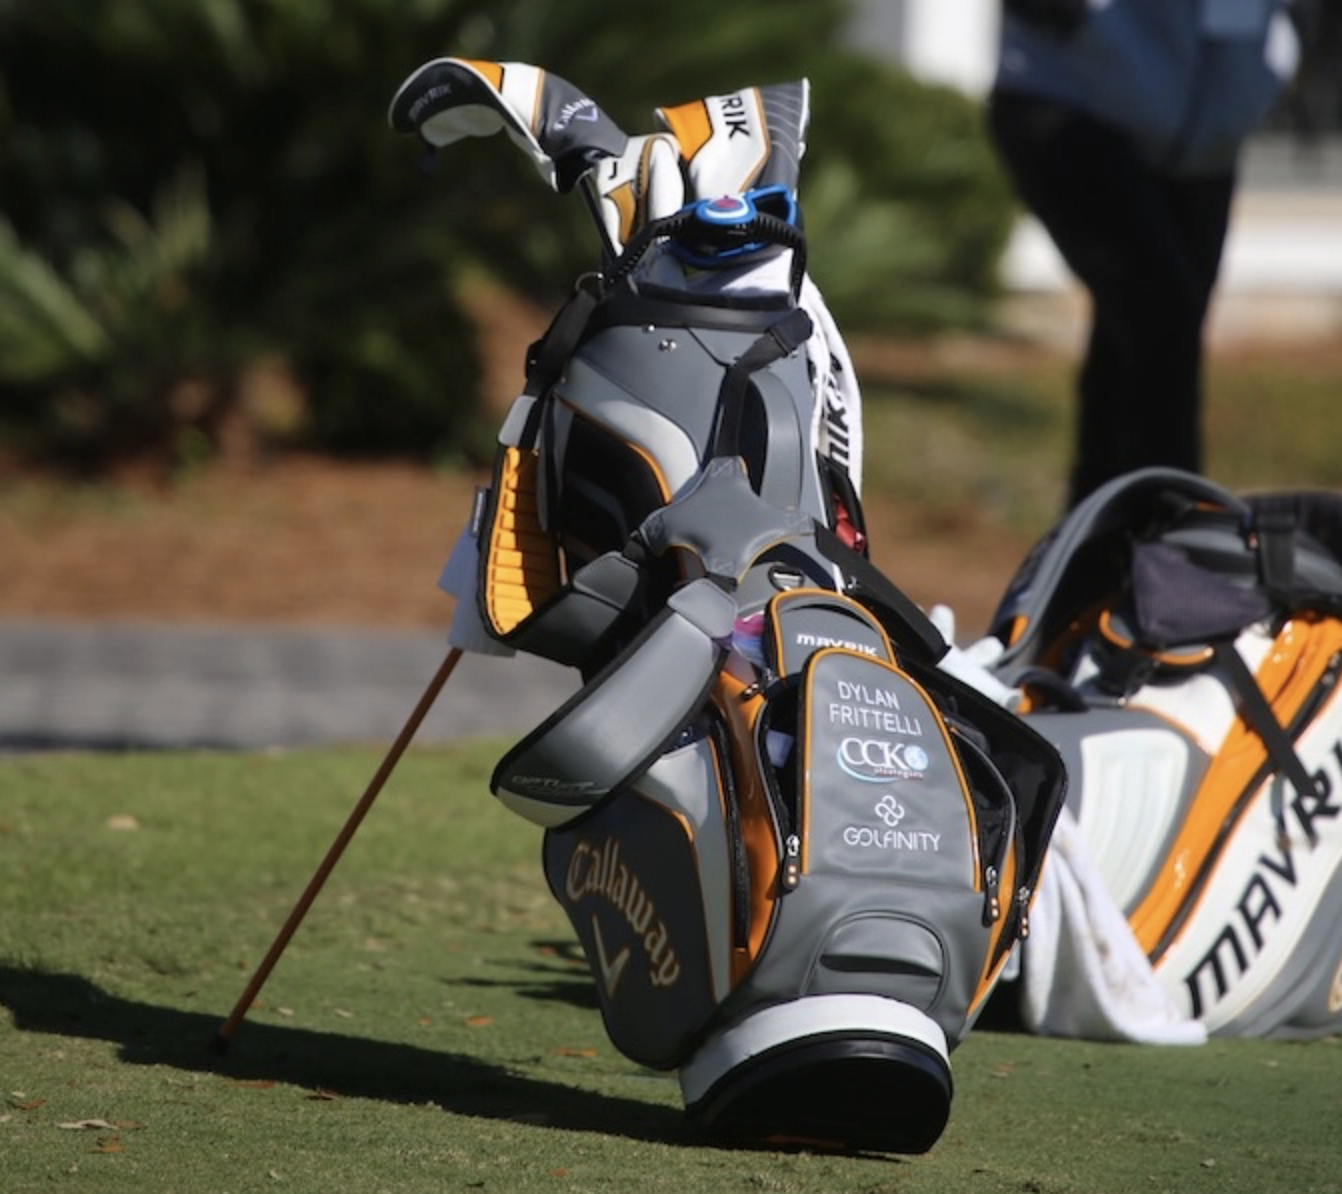 9 golf bags for golfers looking for a style upgrade, Golf Equipment:  Clubs, Balls, Bags